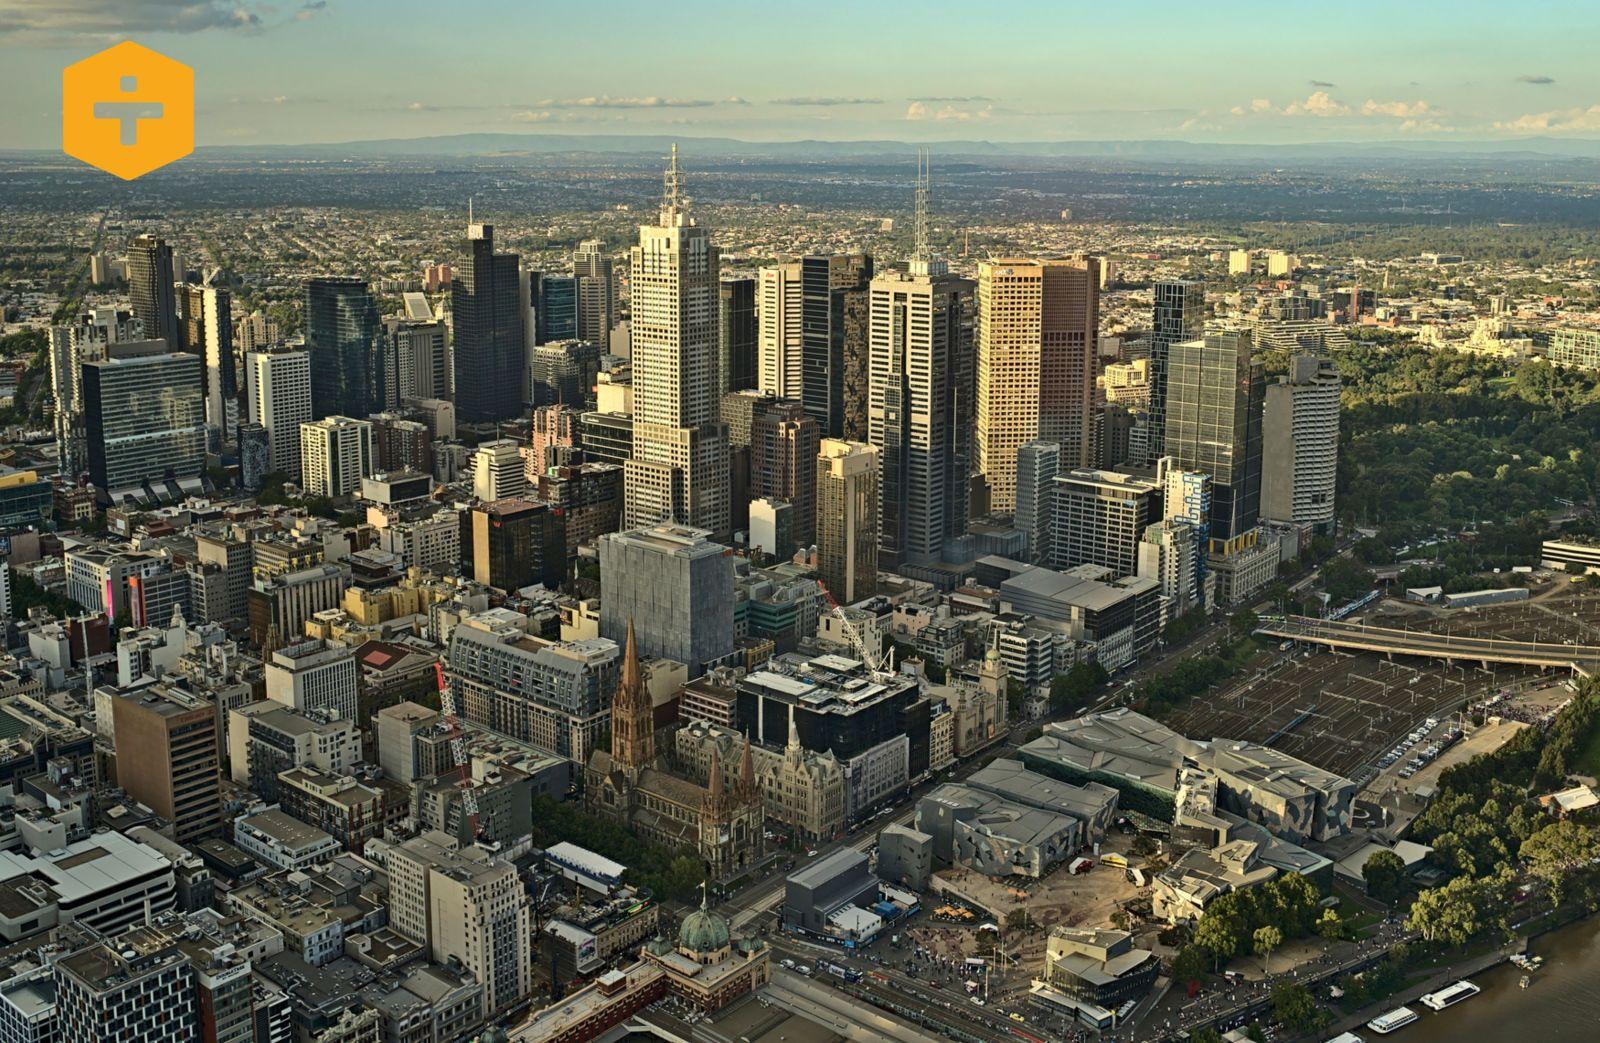 Melbourne's housing market is set for a strong cycle once interest rates are cut, according to Charter Keck Cramer's Richard Temlett